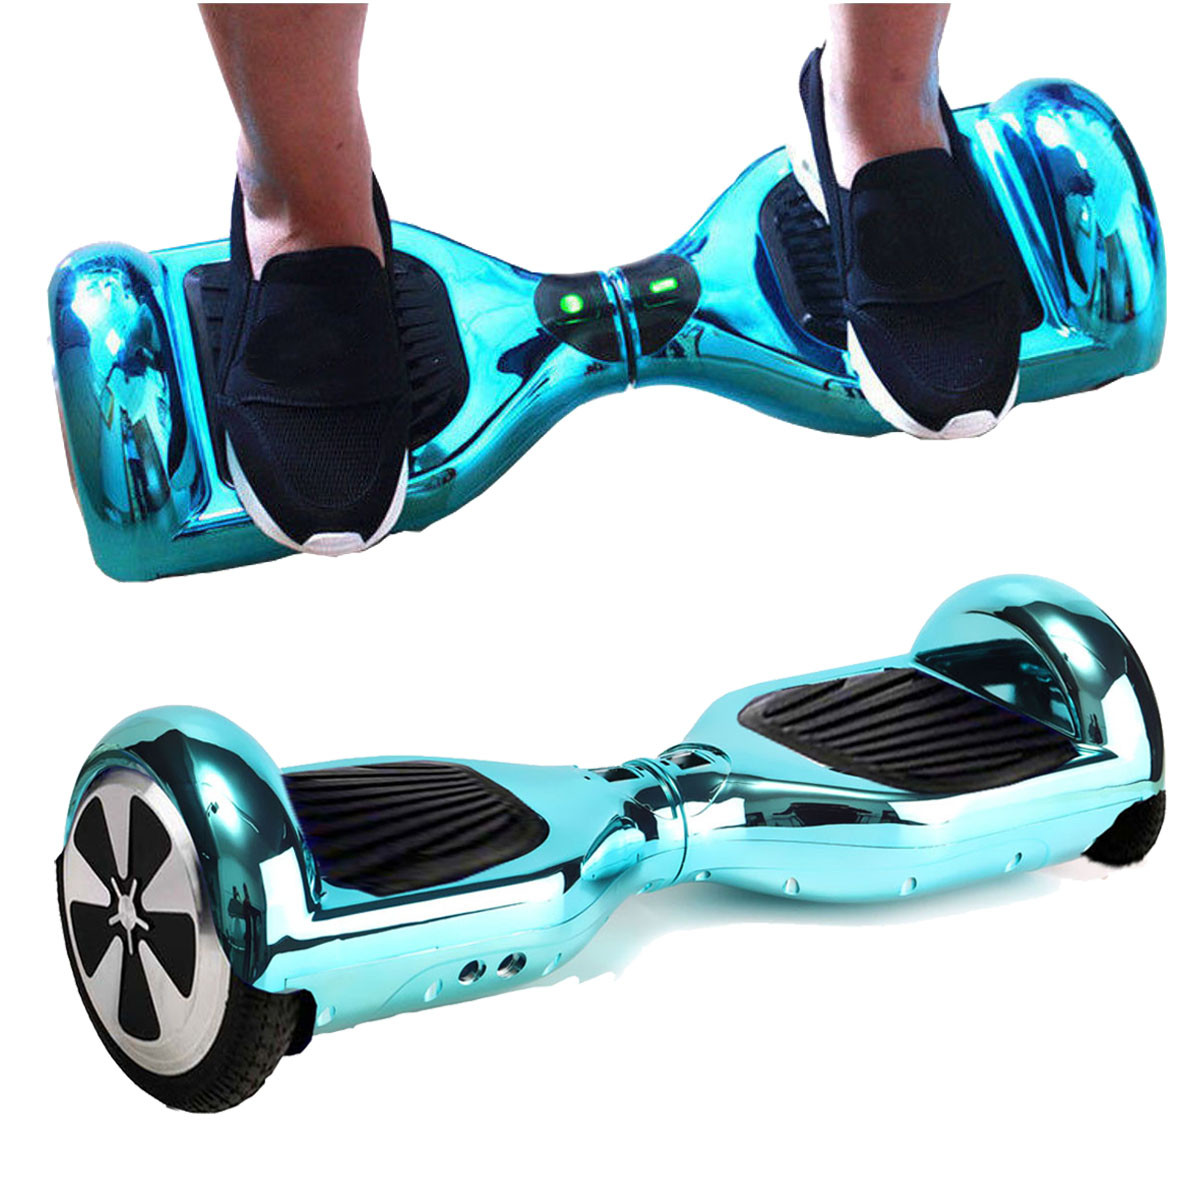 

BIKIGHT ABS Cyan Replacement Durable Cover Case Shell For 6.5" Self Balance Electric Scooter